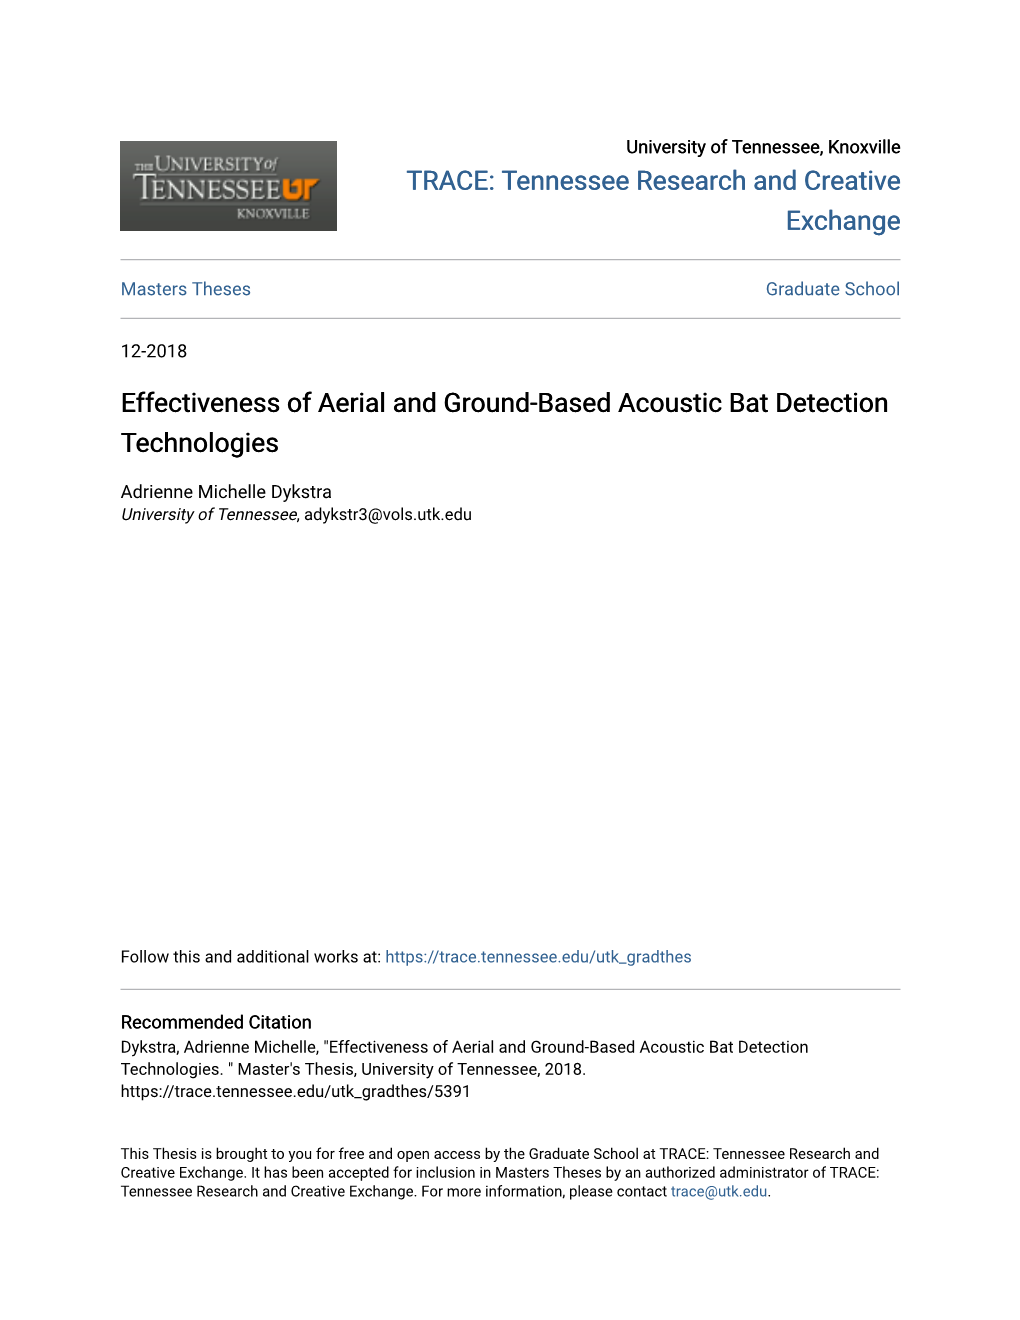 Effectiveness of Aerial and Ground-Based Acoustic Bat Detection Technologies